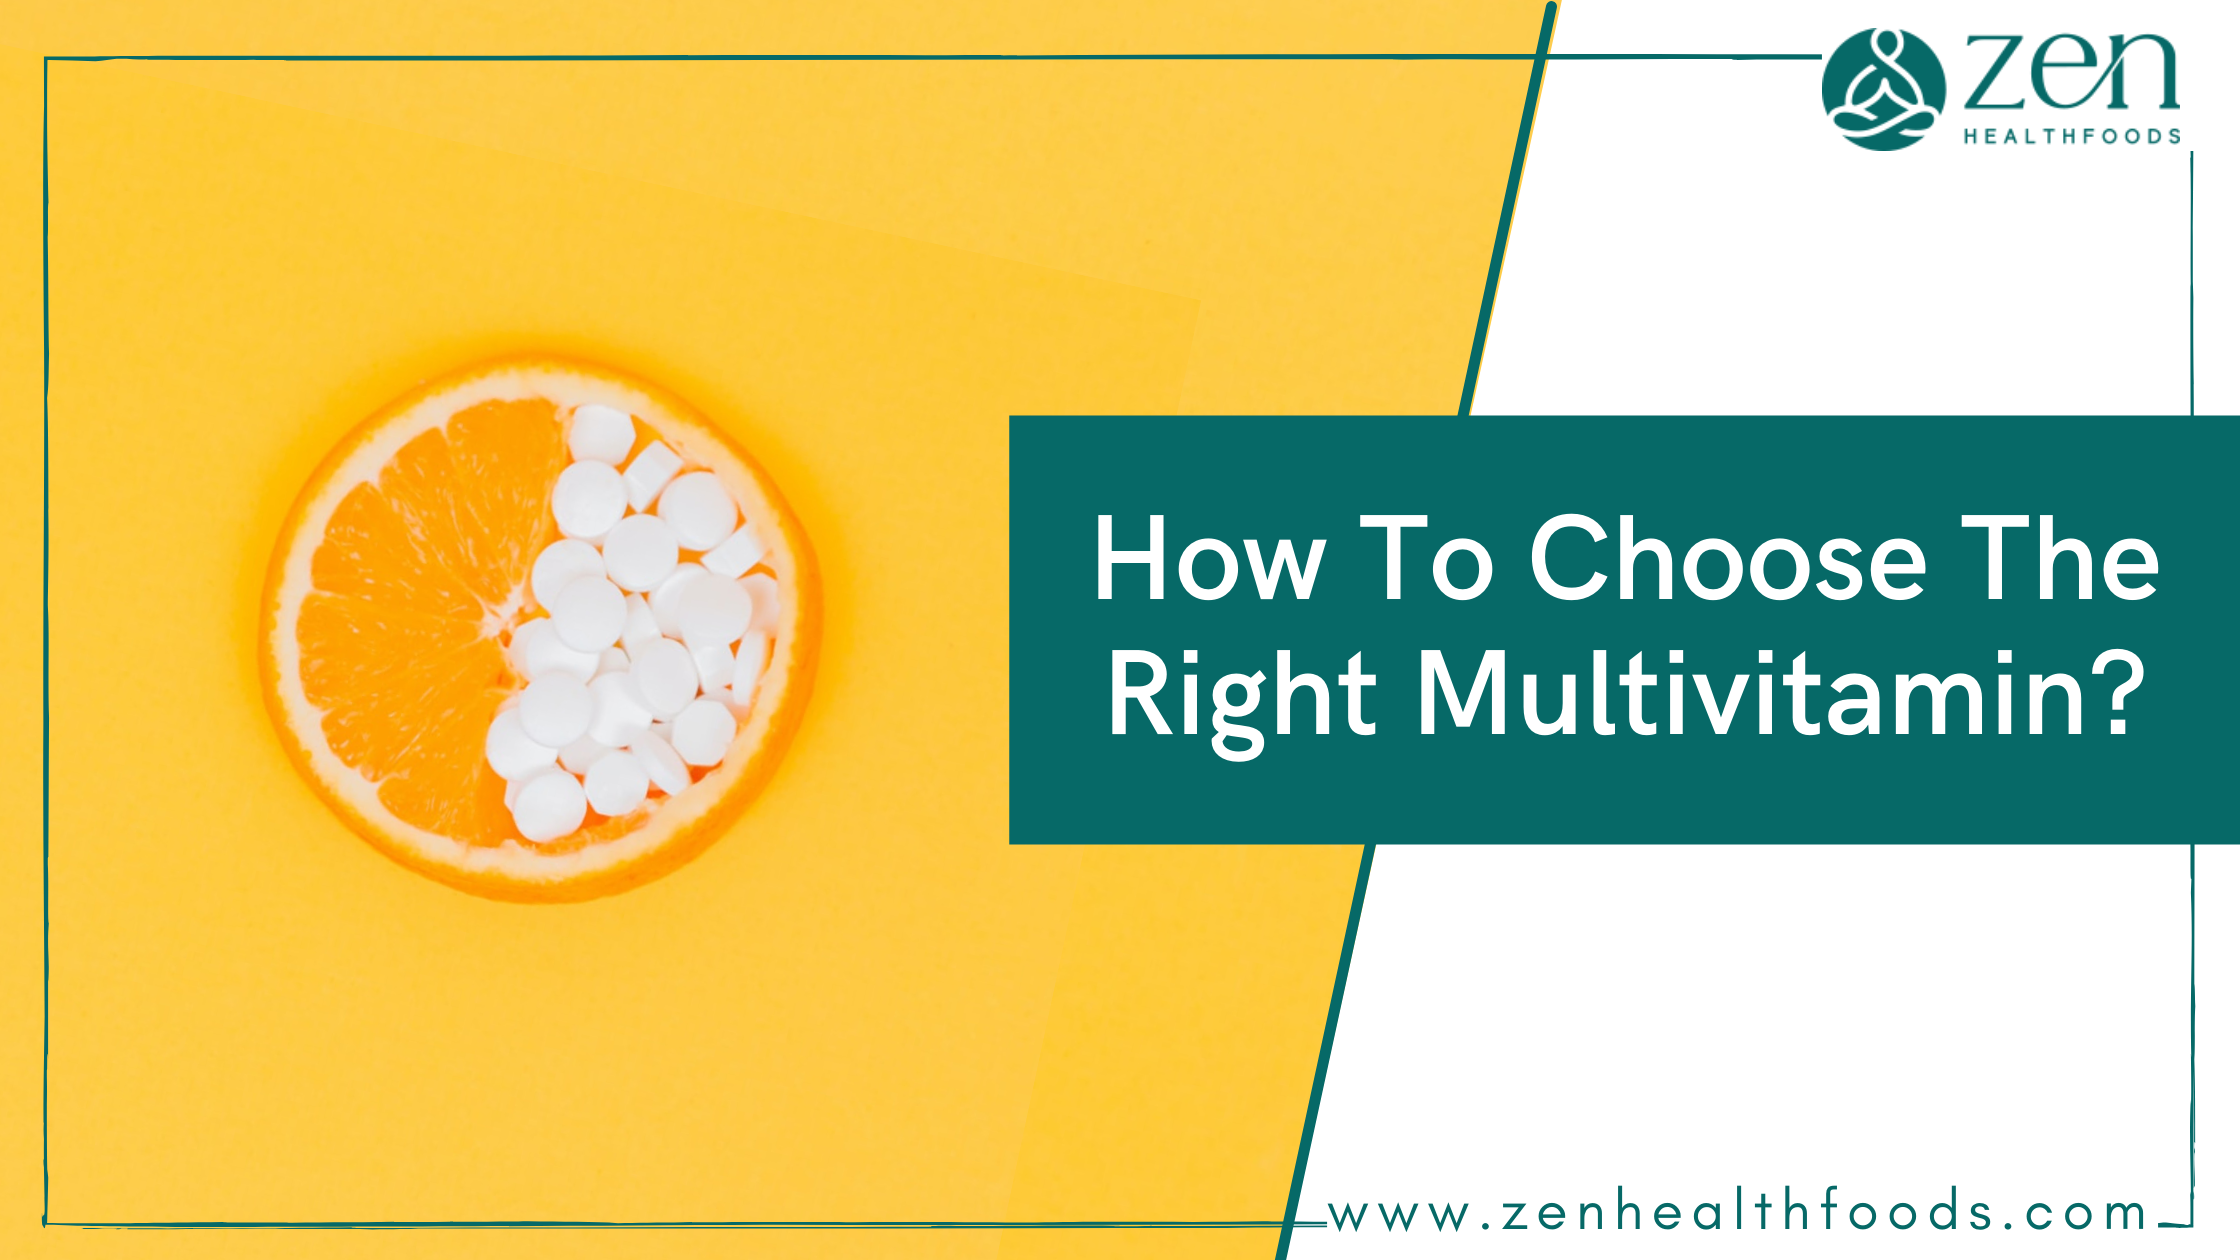 How To Choose a Multivitamin for You